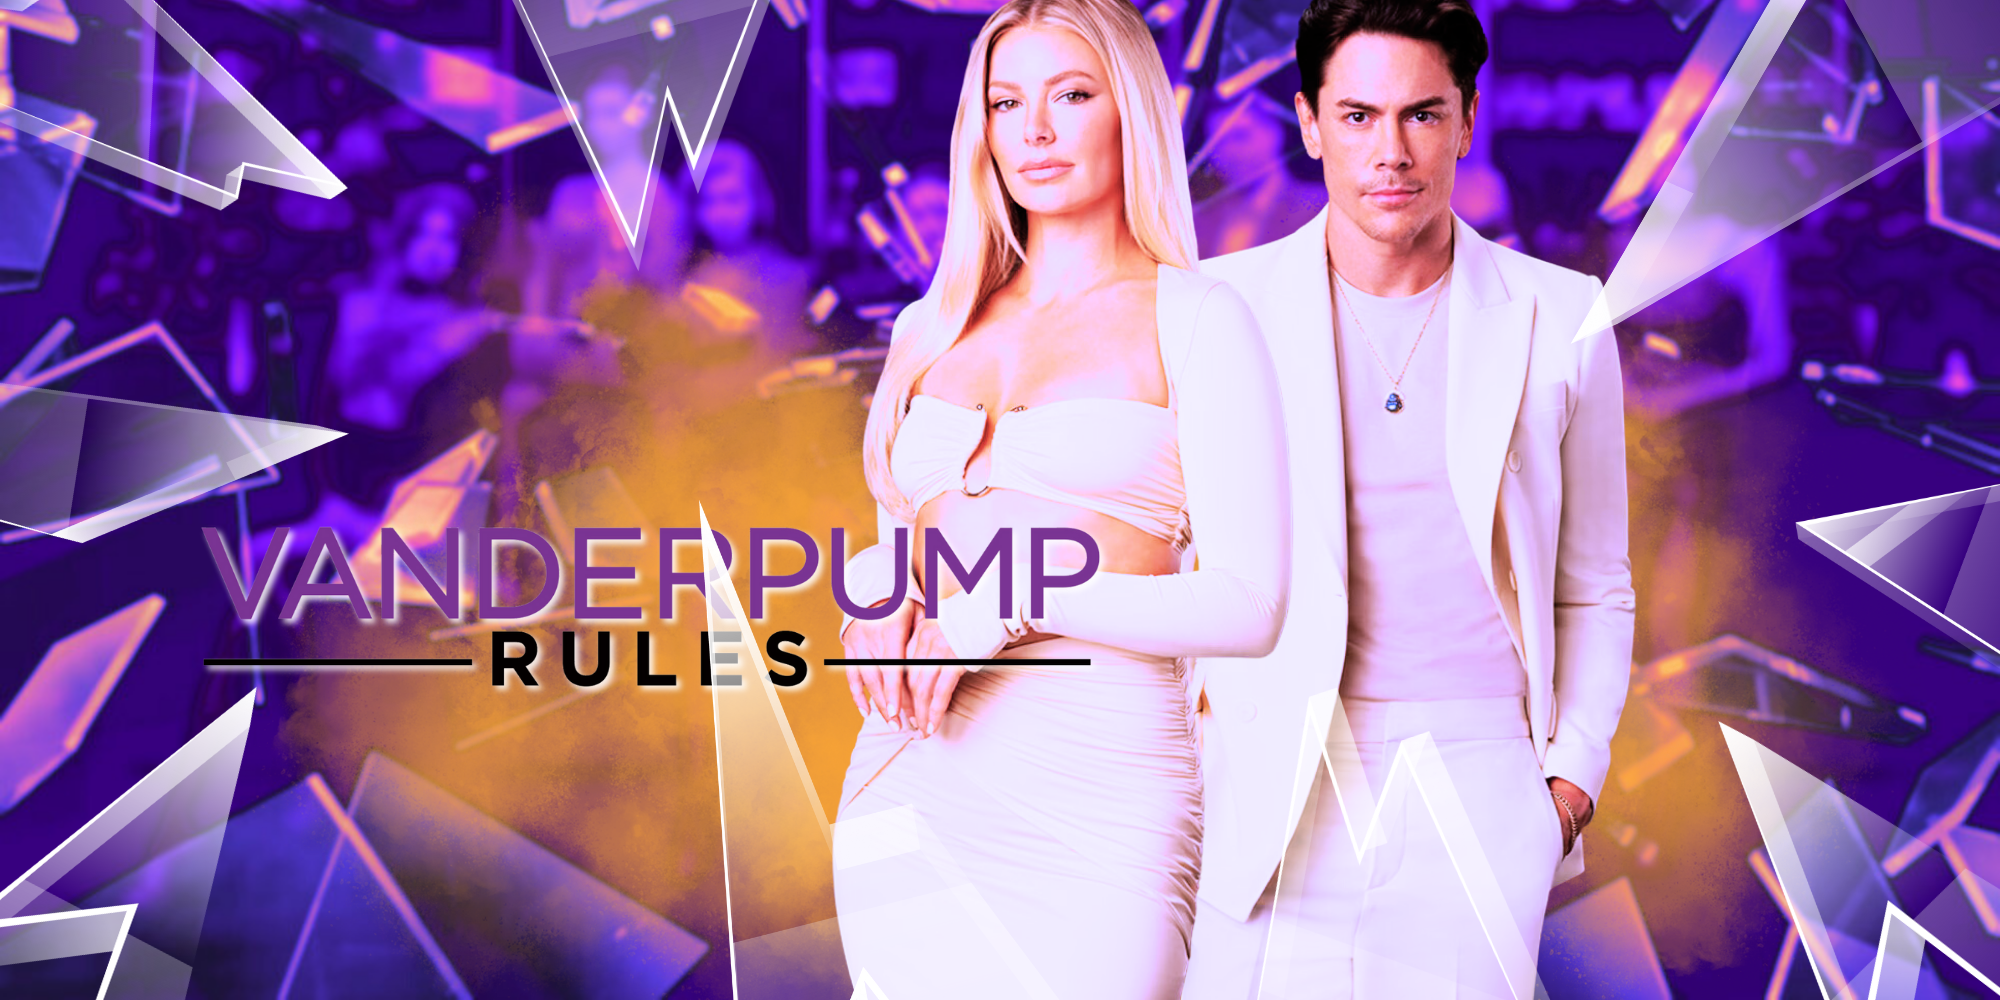  Vanderpump Rules Season 11 with Ariana Madix and Tom Sandoval, and shards of glass surrounding them